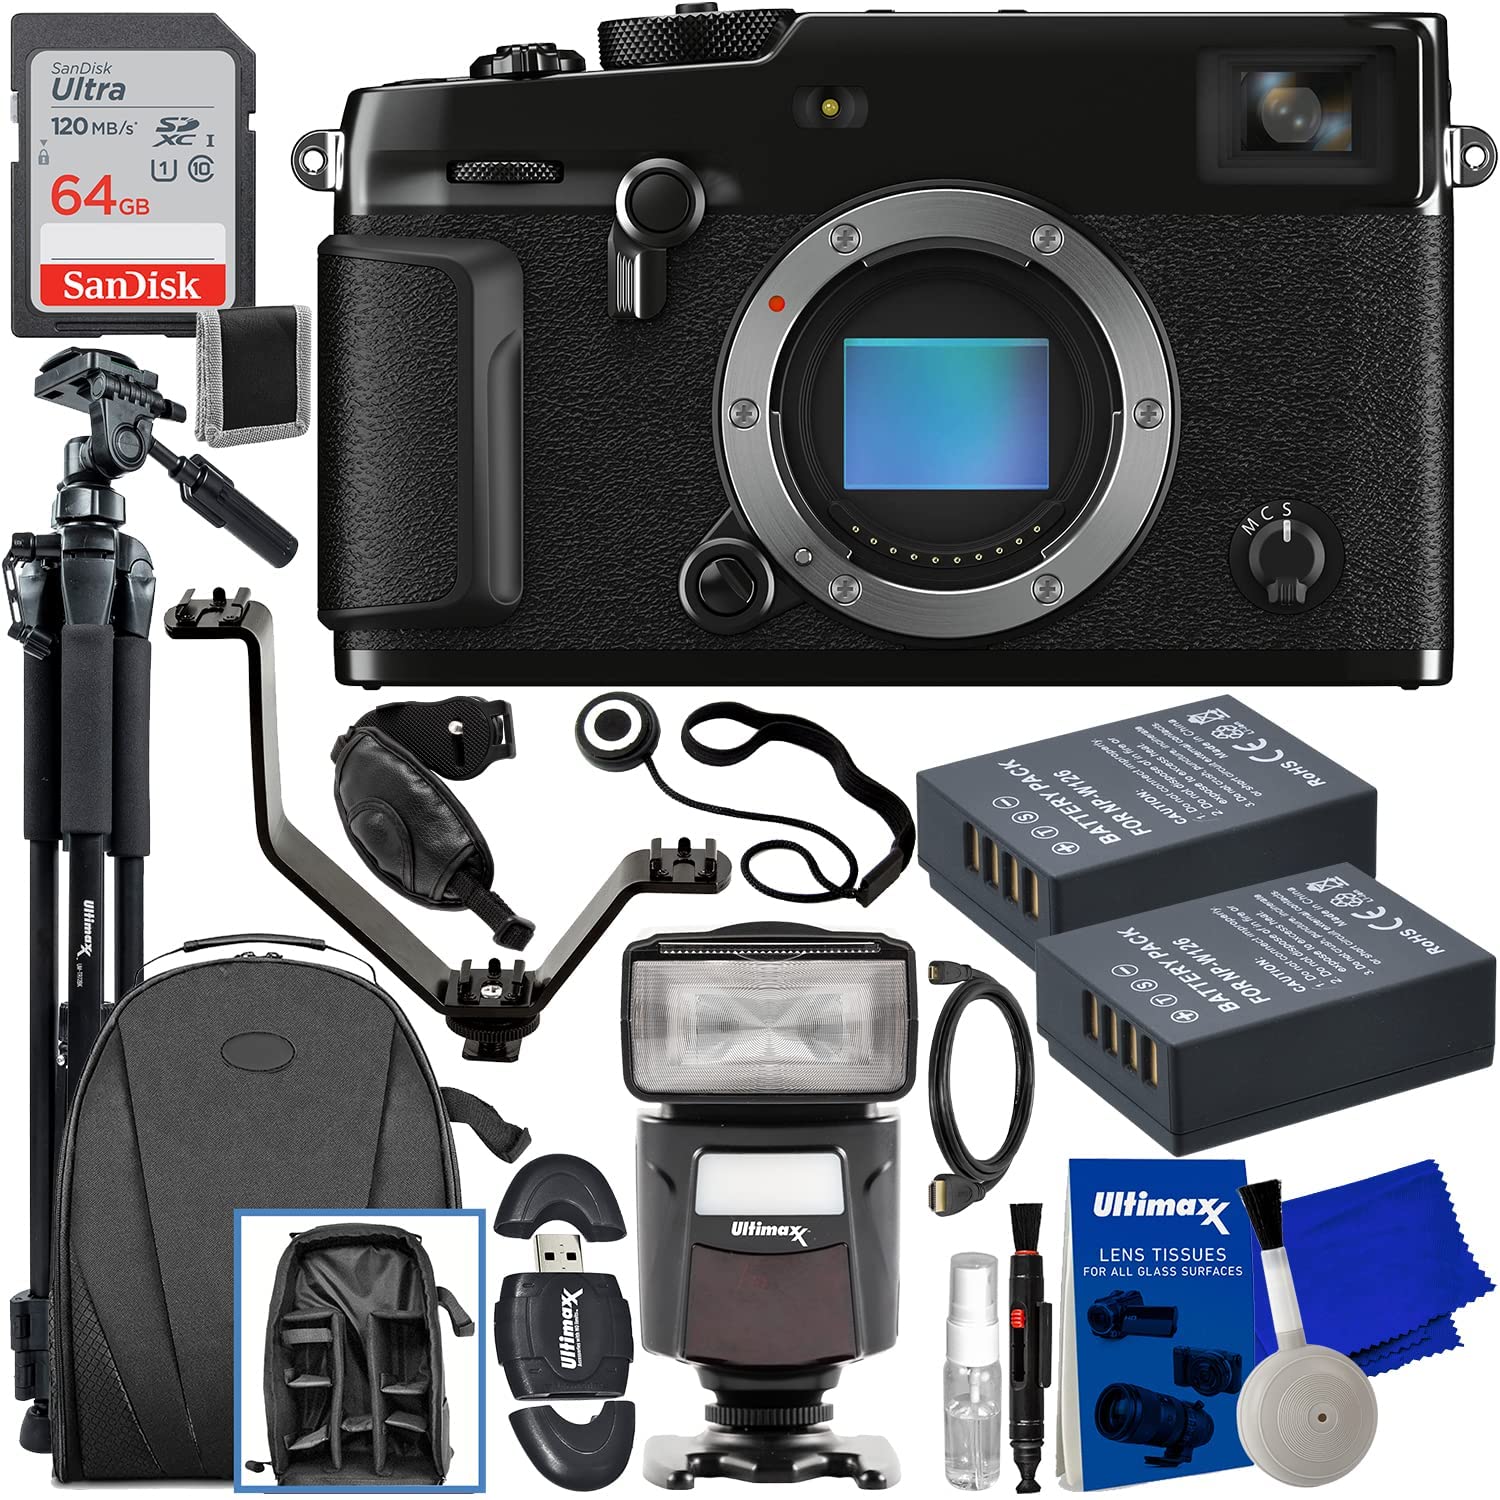 FUJIFILM X-Pro3 Mirrorless Camera (Body Only, Black) + SanDisk 64GB Ultra SDXC Memory Card, V-Shaped Flash Bracket with 3 Cold Shoes, 2X Replacement Batteries & Much More (28pc Bundle)